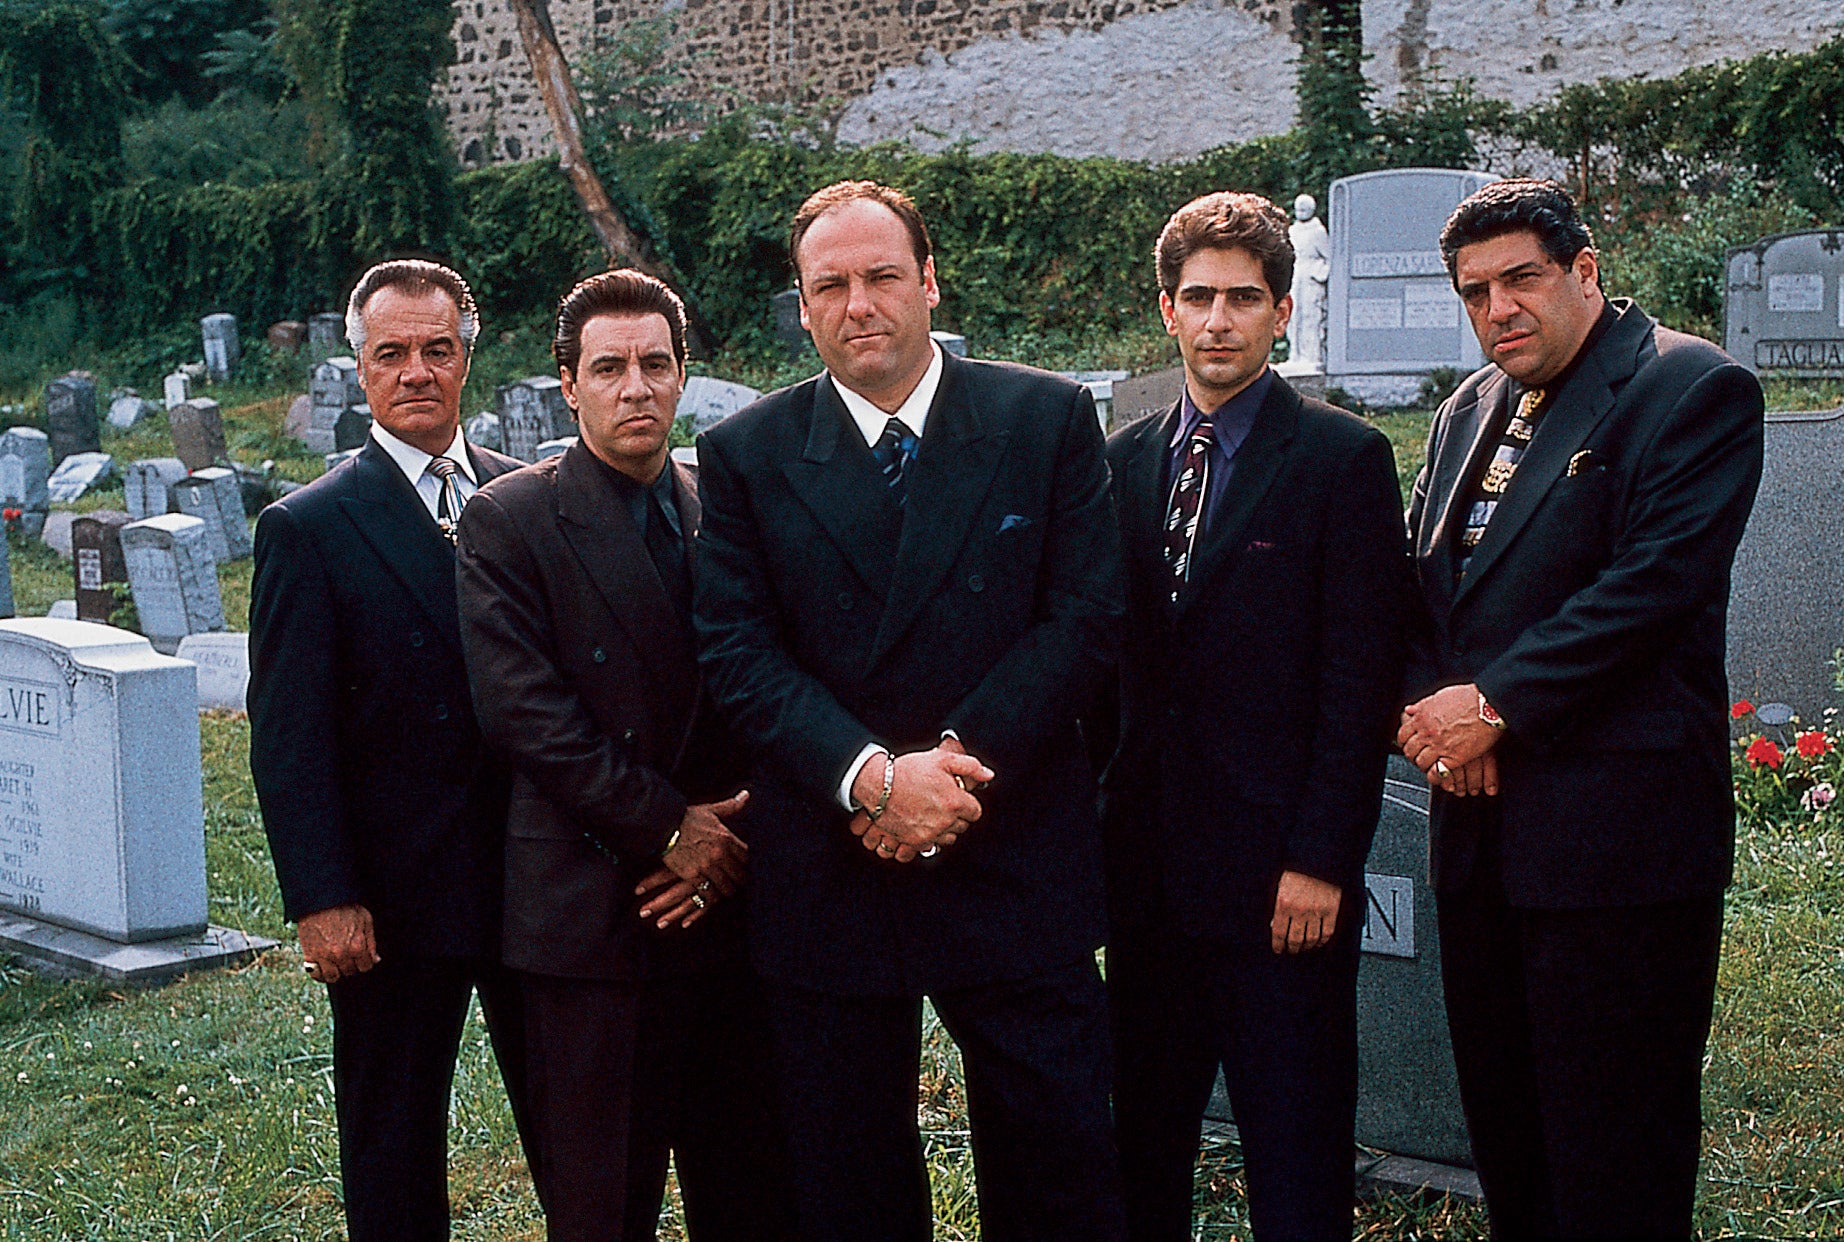 ‘The Sopranos’ creator says TV is being dumbed down, calls show's 25th anniversary a 'funeral' for industry